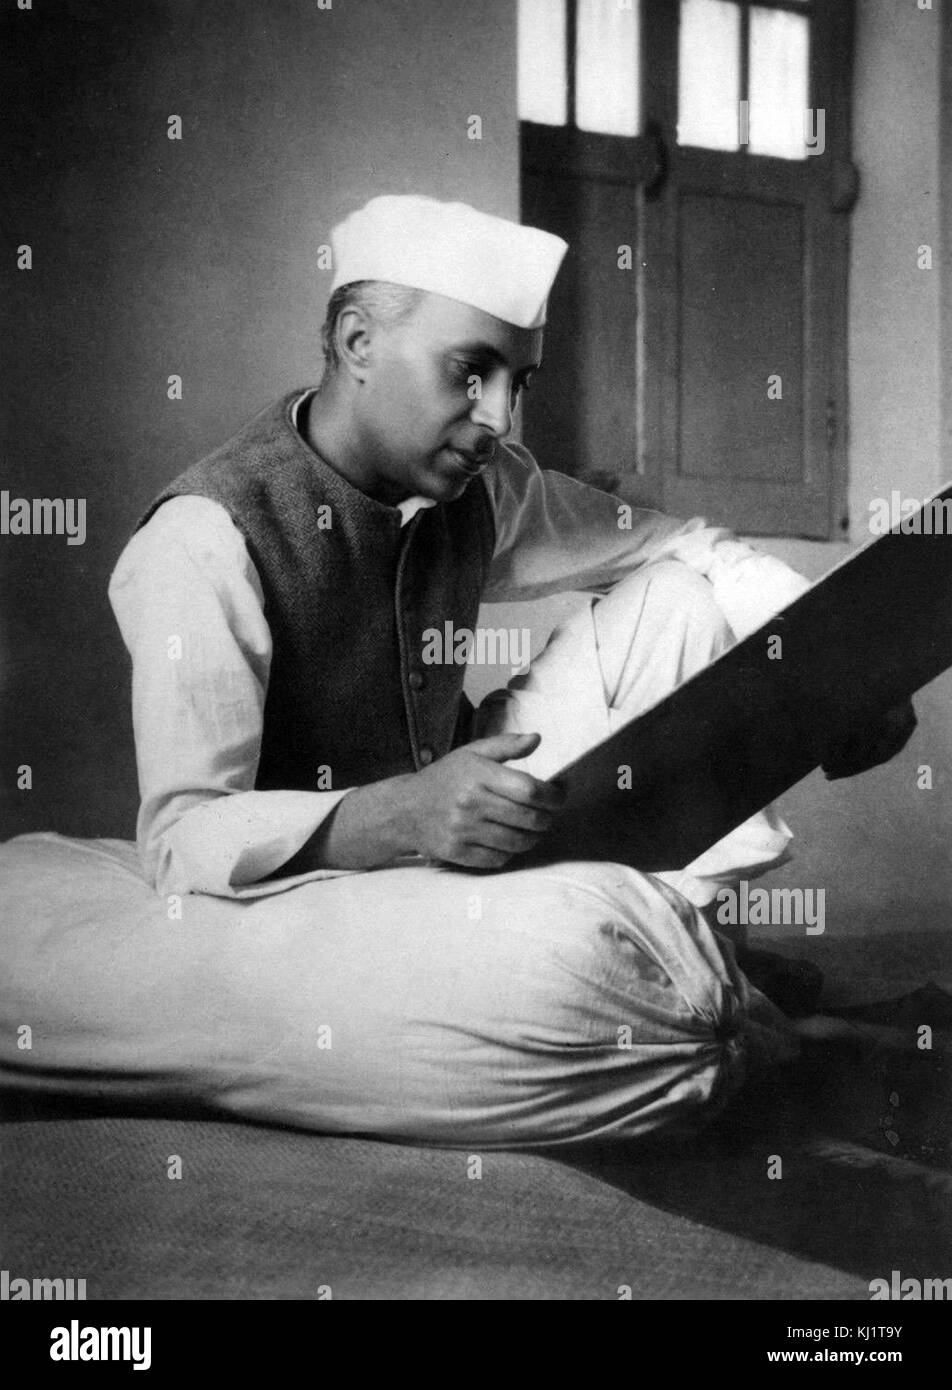 Jawaharlal Nehru (1889 –1964) first Prime Minister of India and a central figure in Indian politics before and after independence. leader of the Indian independence movement under the tutelage of Mahatma Gandhi and ruled India from its establishment as an independent nation in 1947 until his death in 1964. Stock Photo